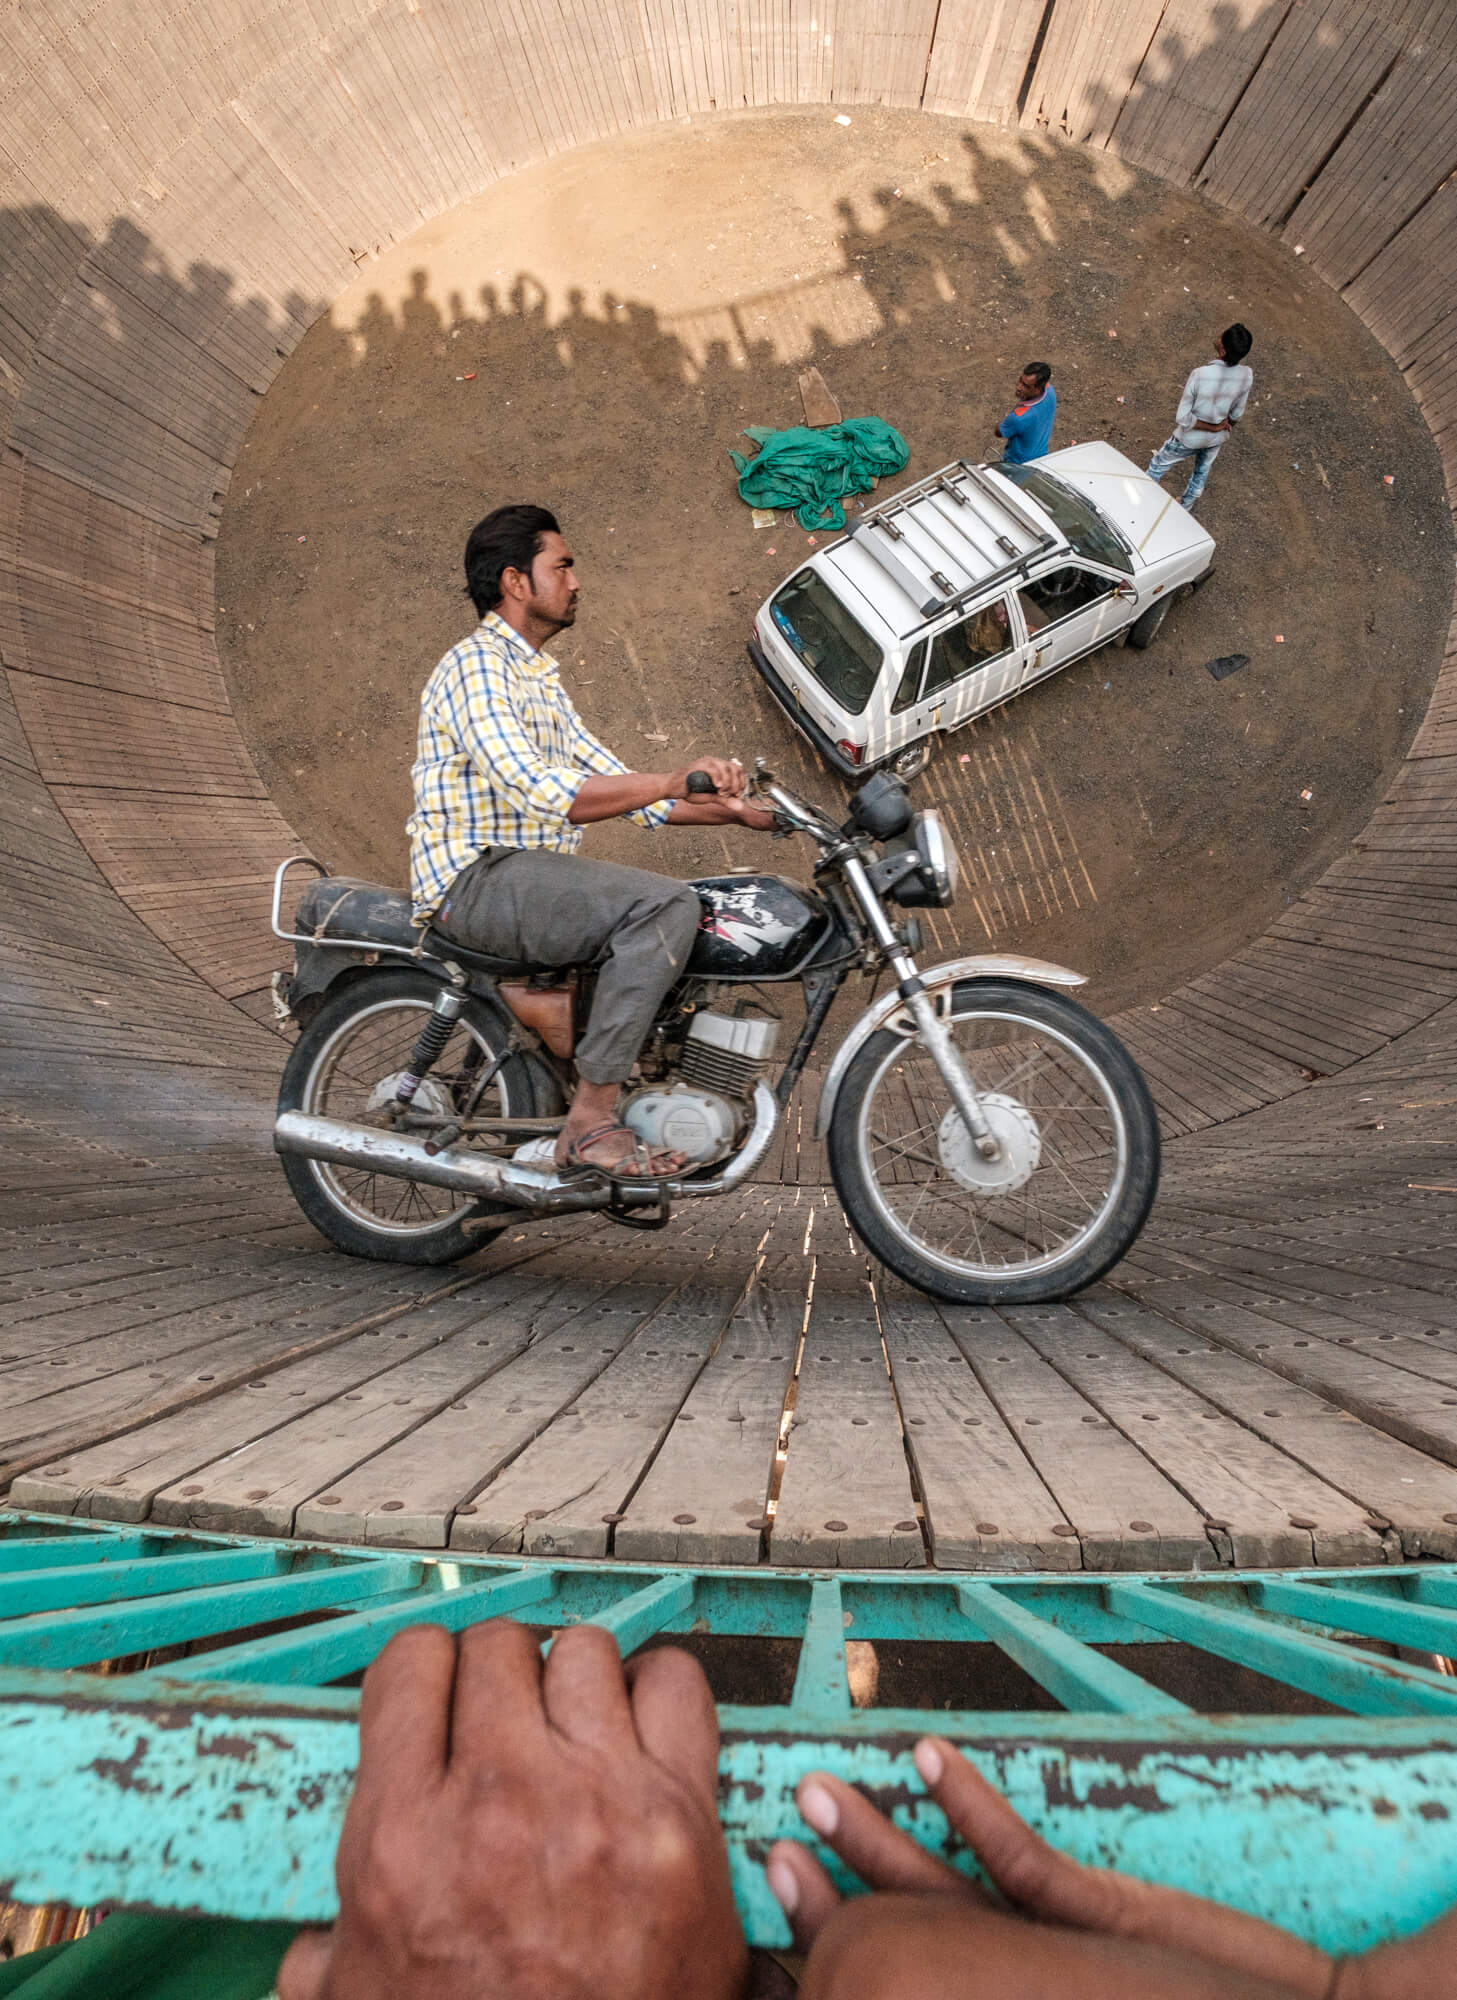 Motorcycle stunt rider in India